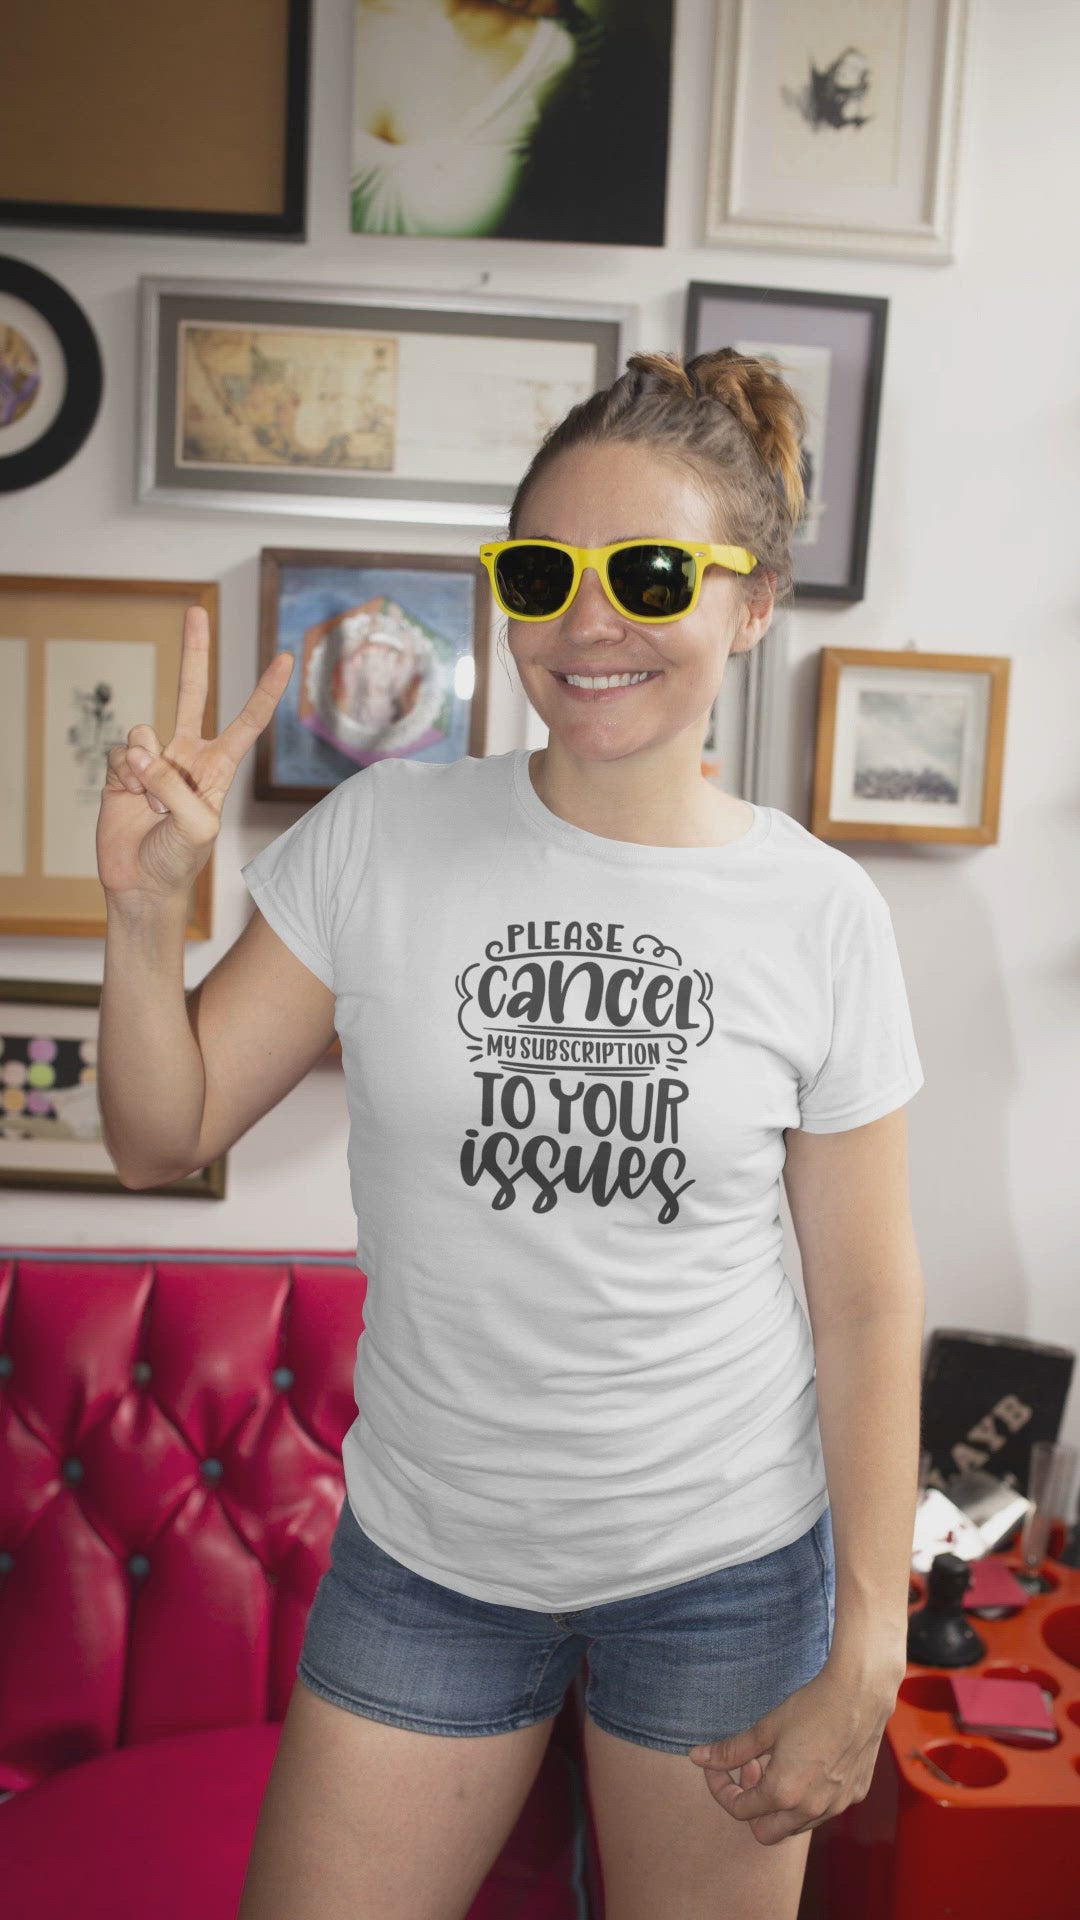 video of young lady in the please cancel subscription shirt - Purple LadyBug Decor